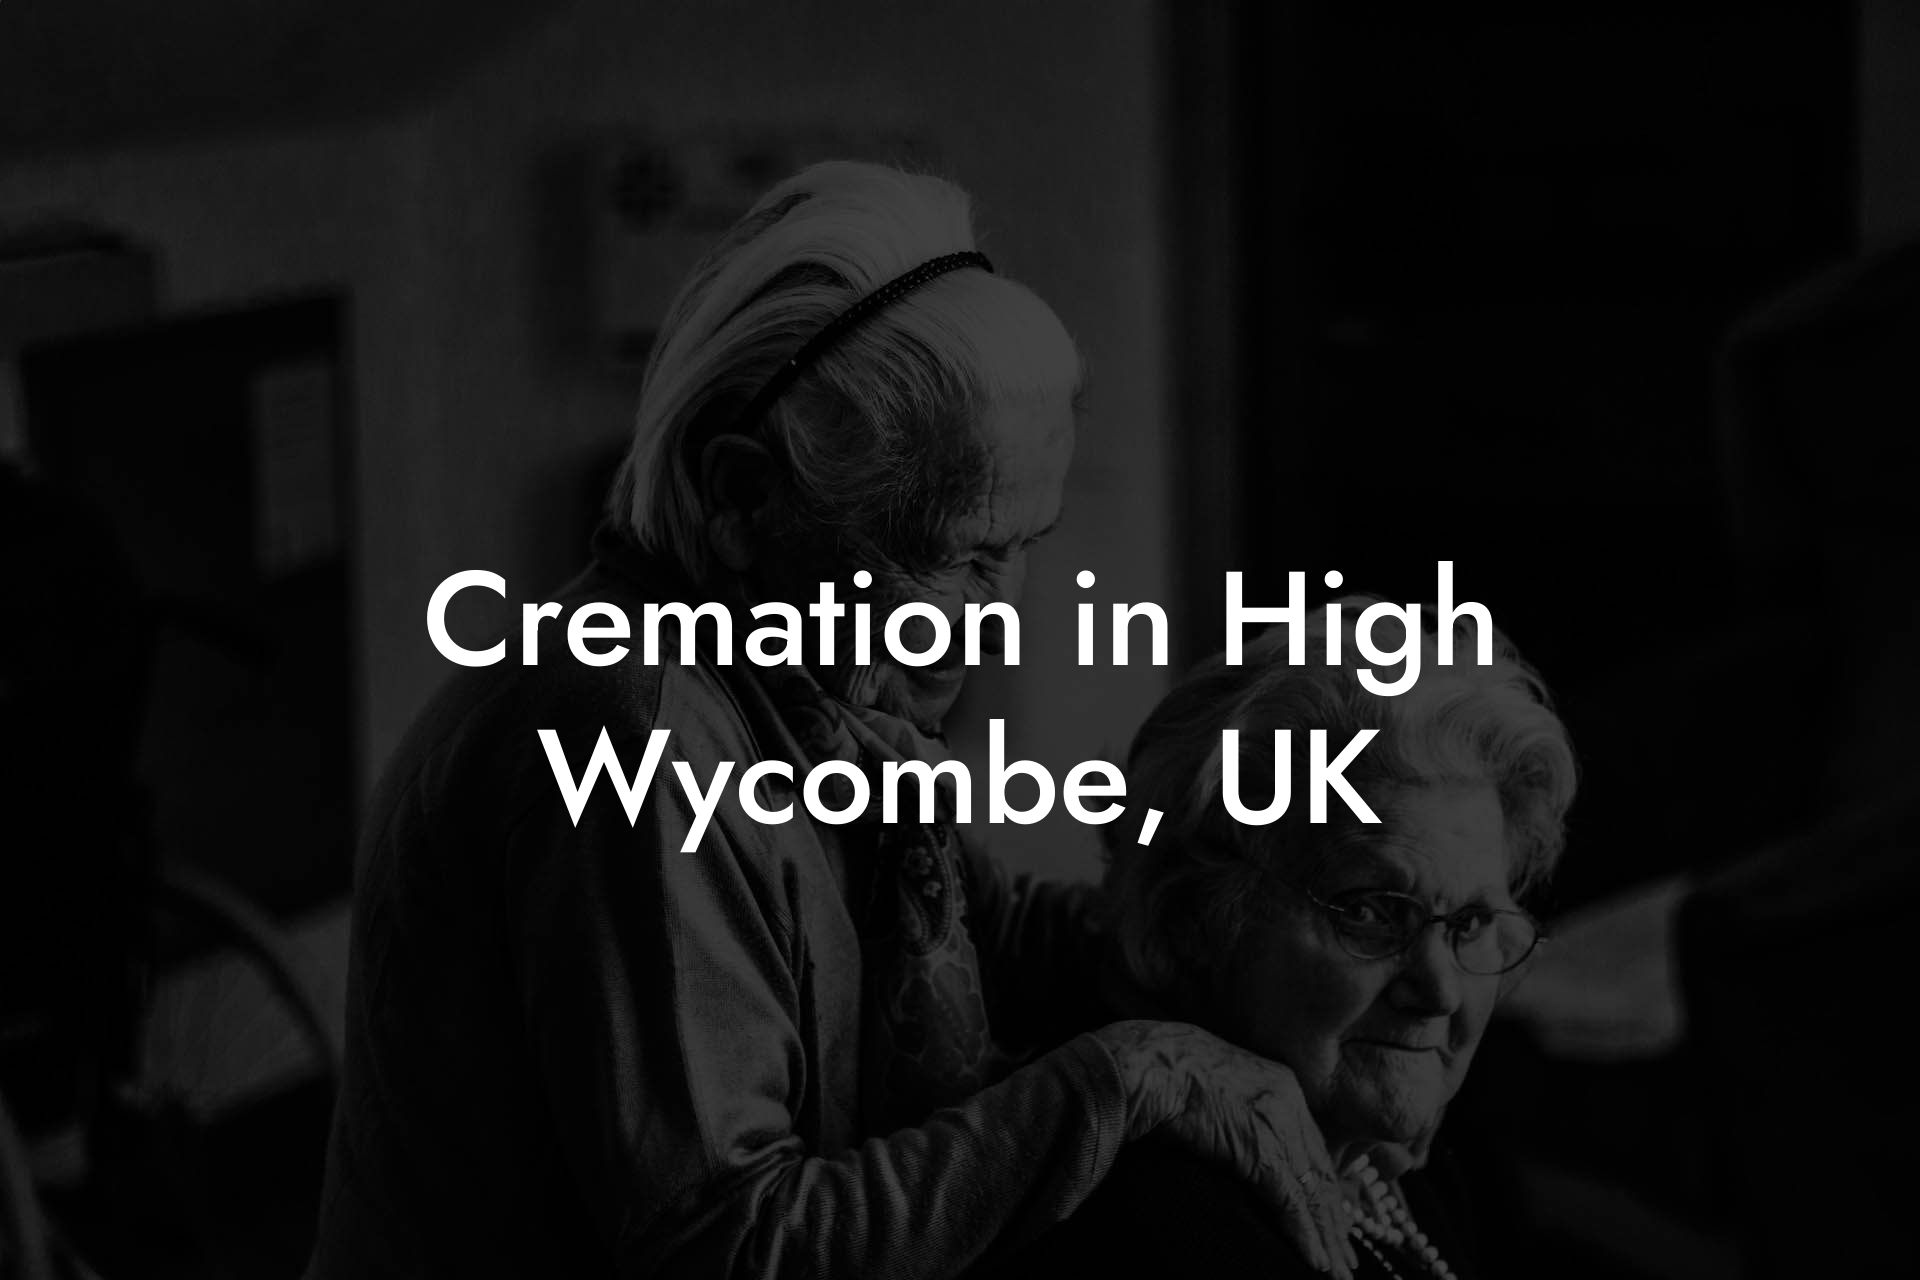 Cremation in High Wycombe, UK